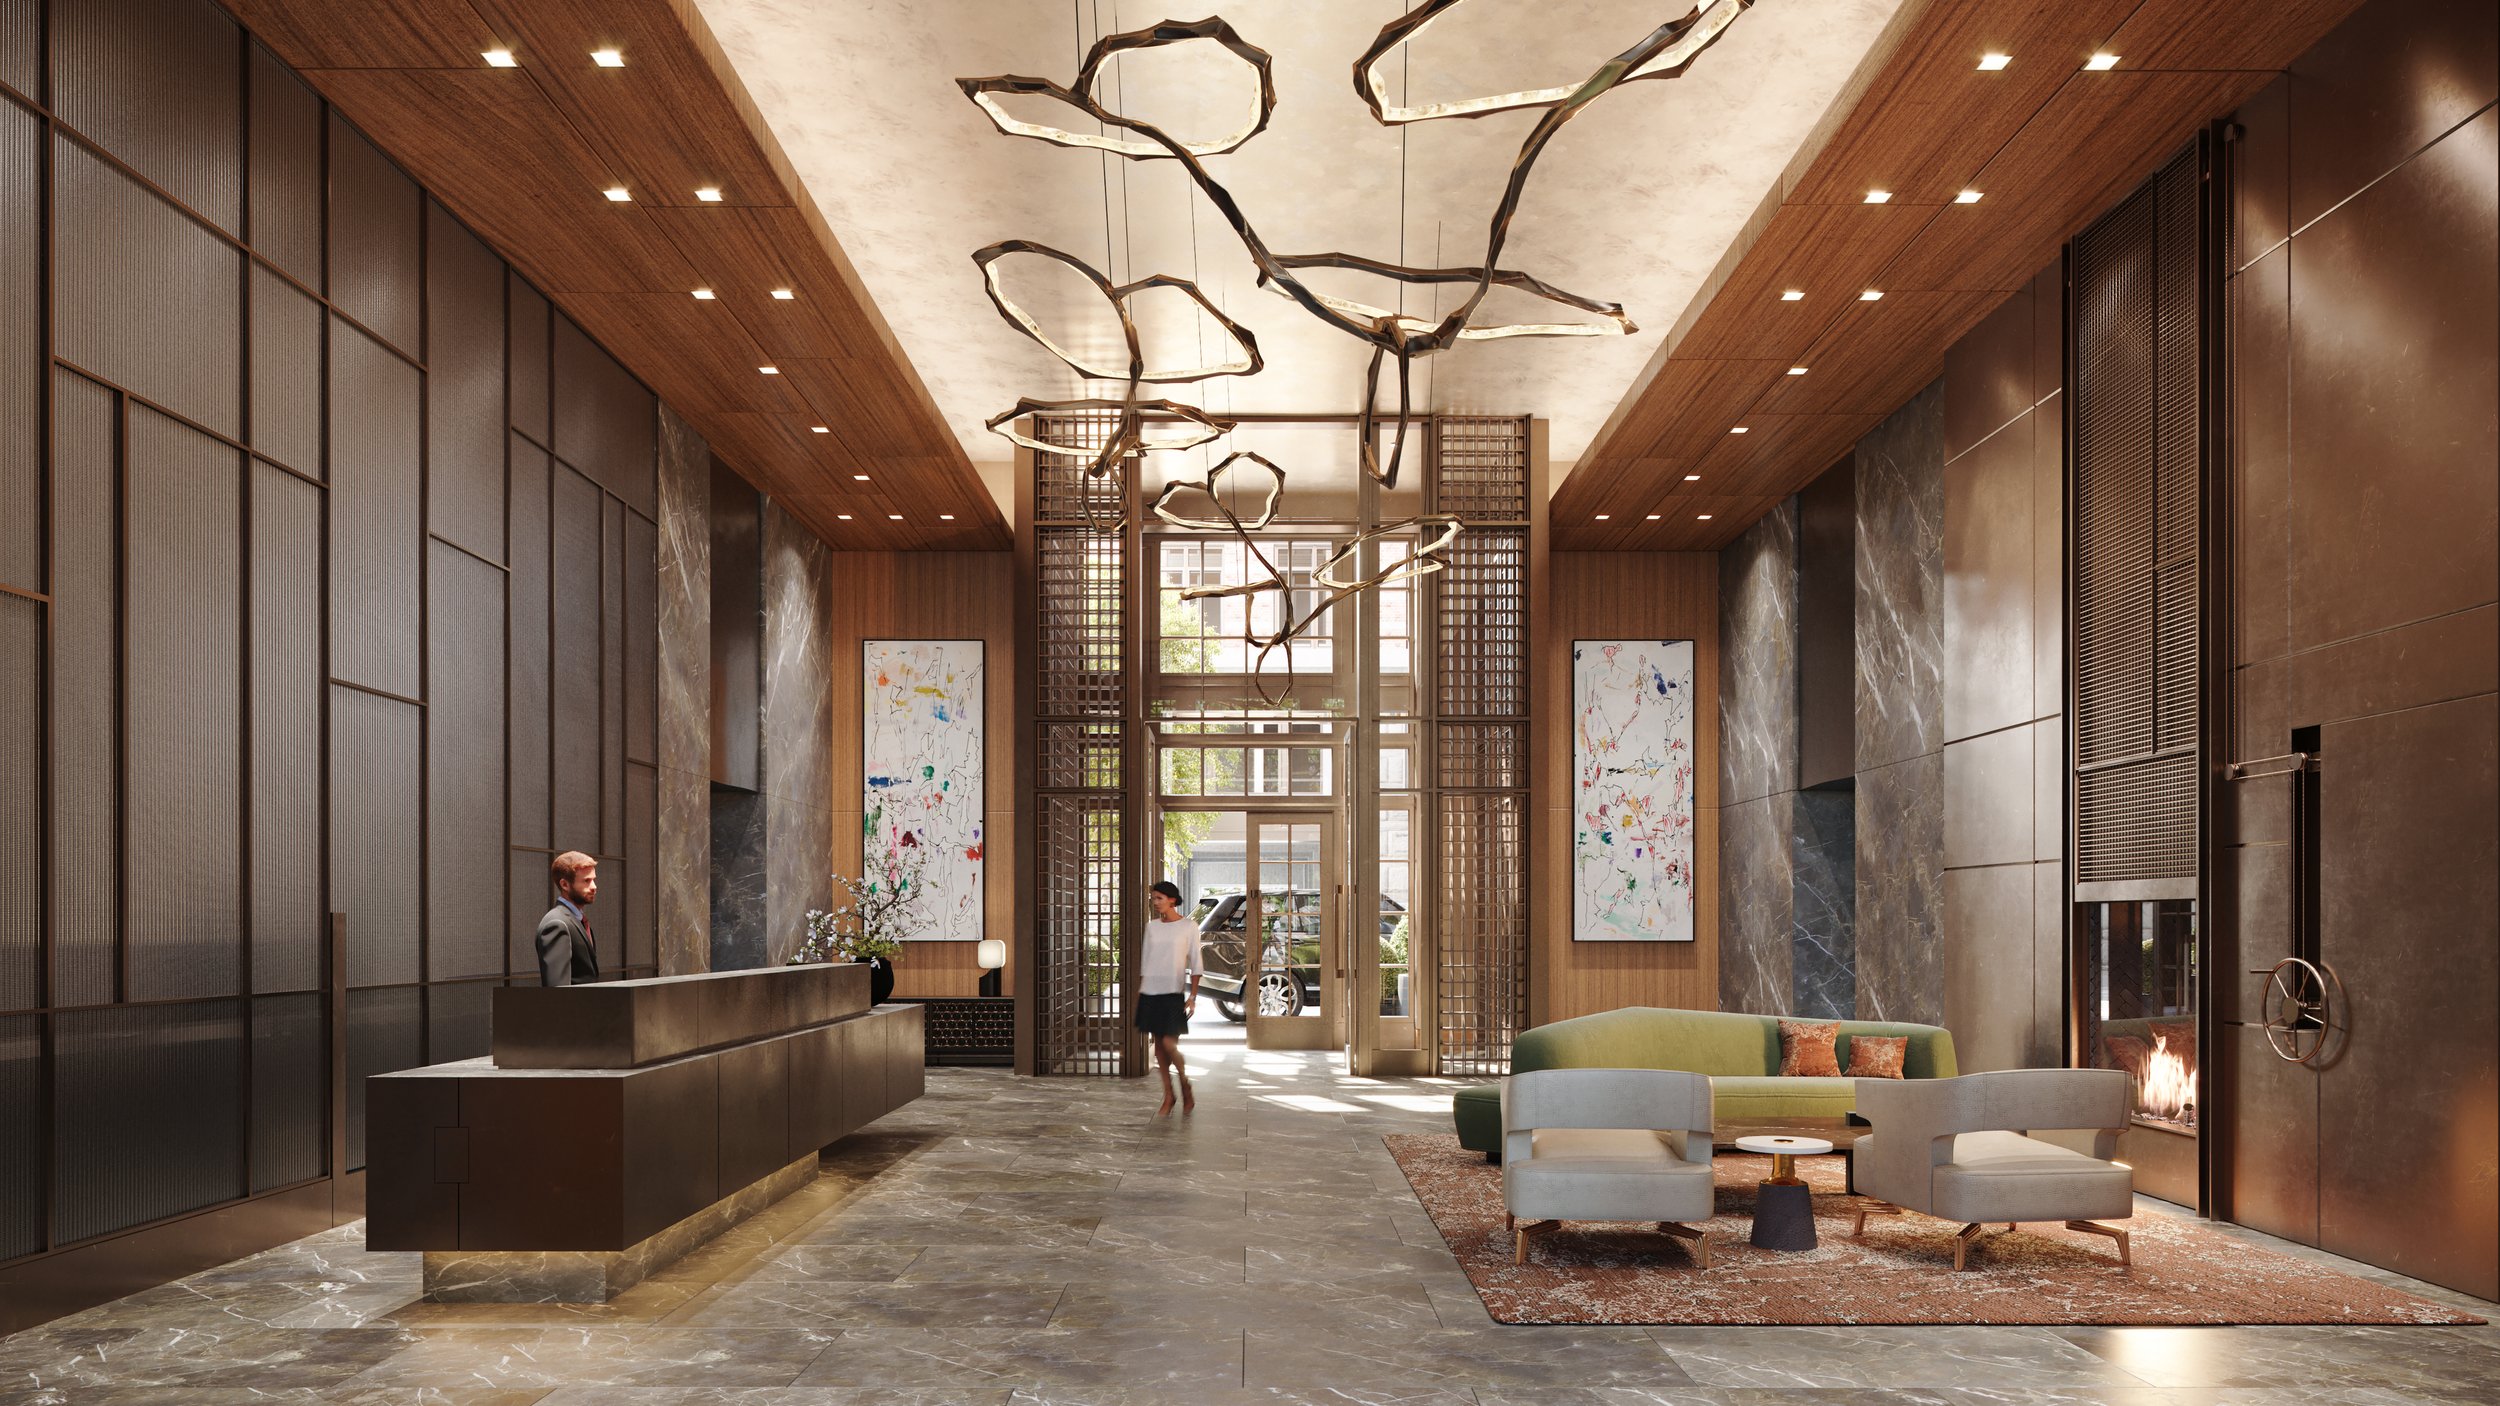  The building will also offer tailored programming and exclusive benefits and services through the unparalleled Related Life platform run by dedicated lifestyle experts for a hospitality-driven living experience.   Adjacent to the lobby is The Cortla